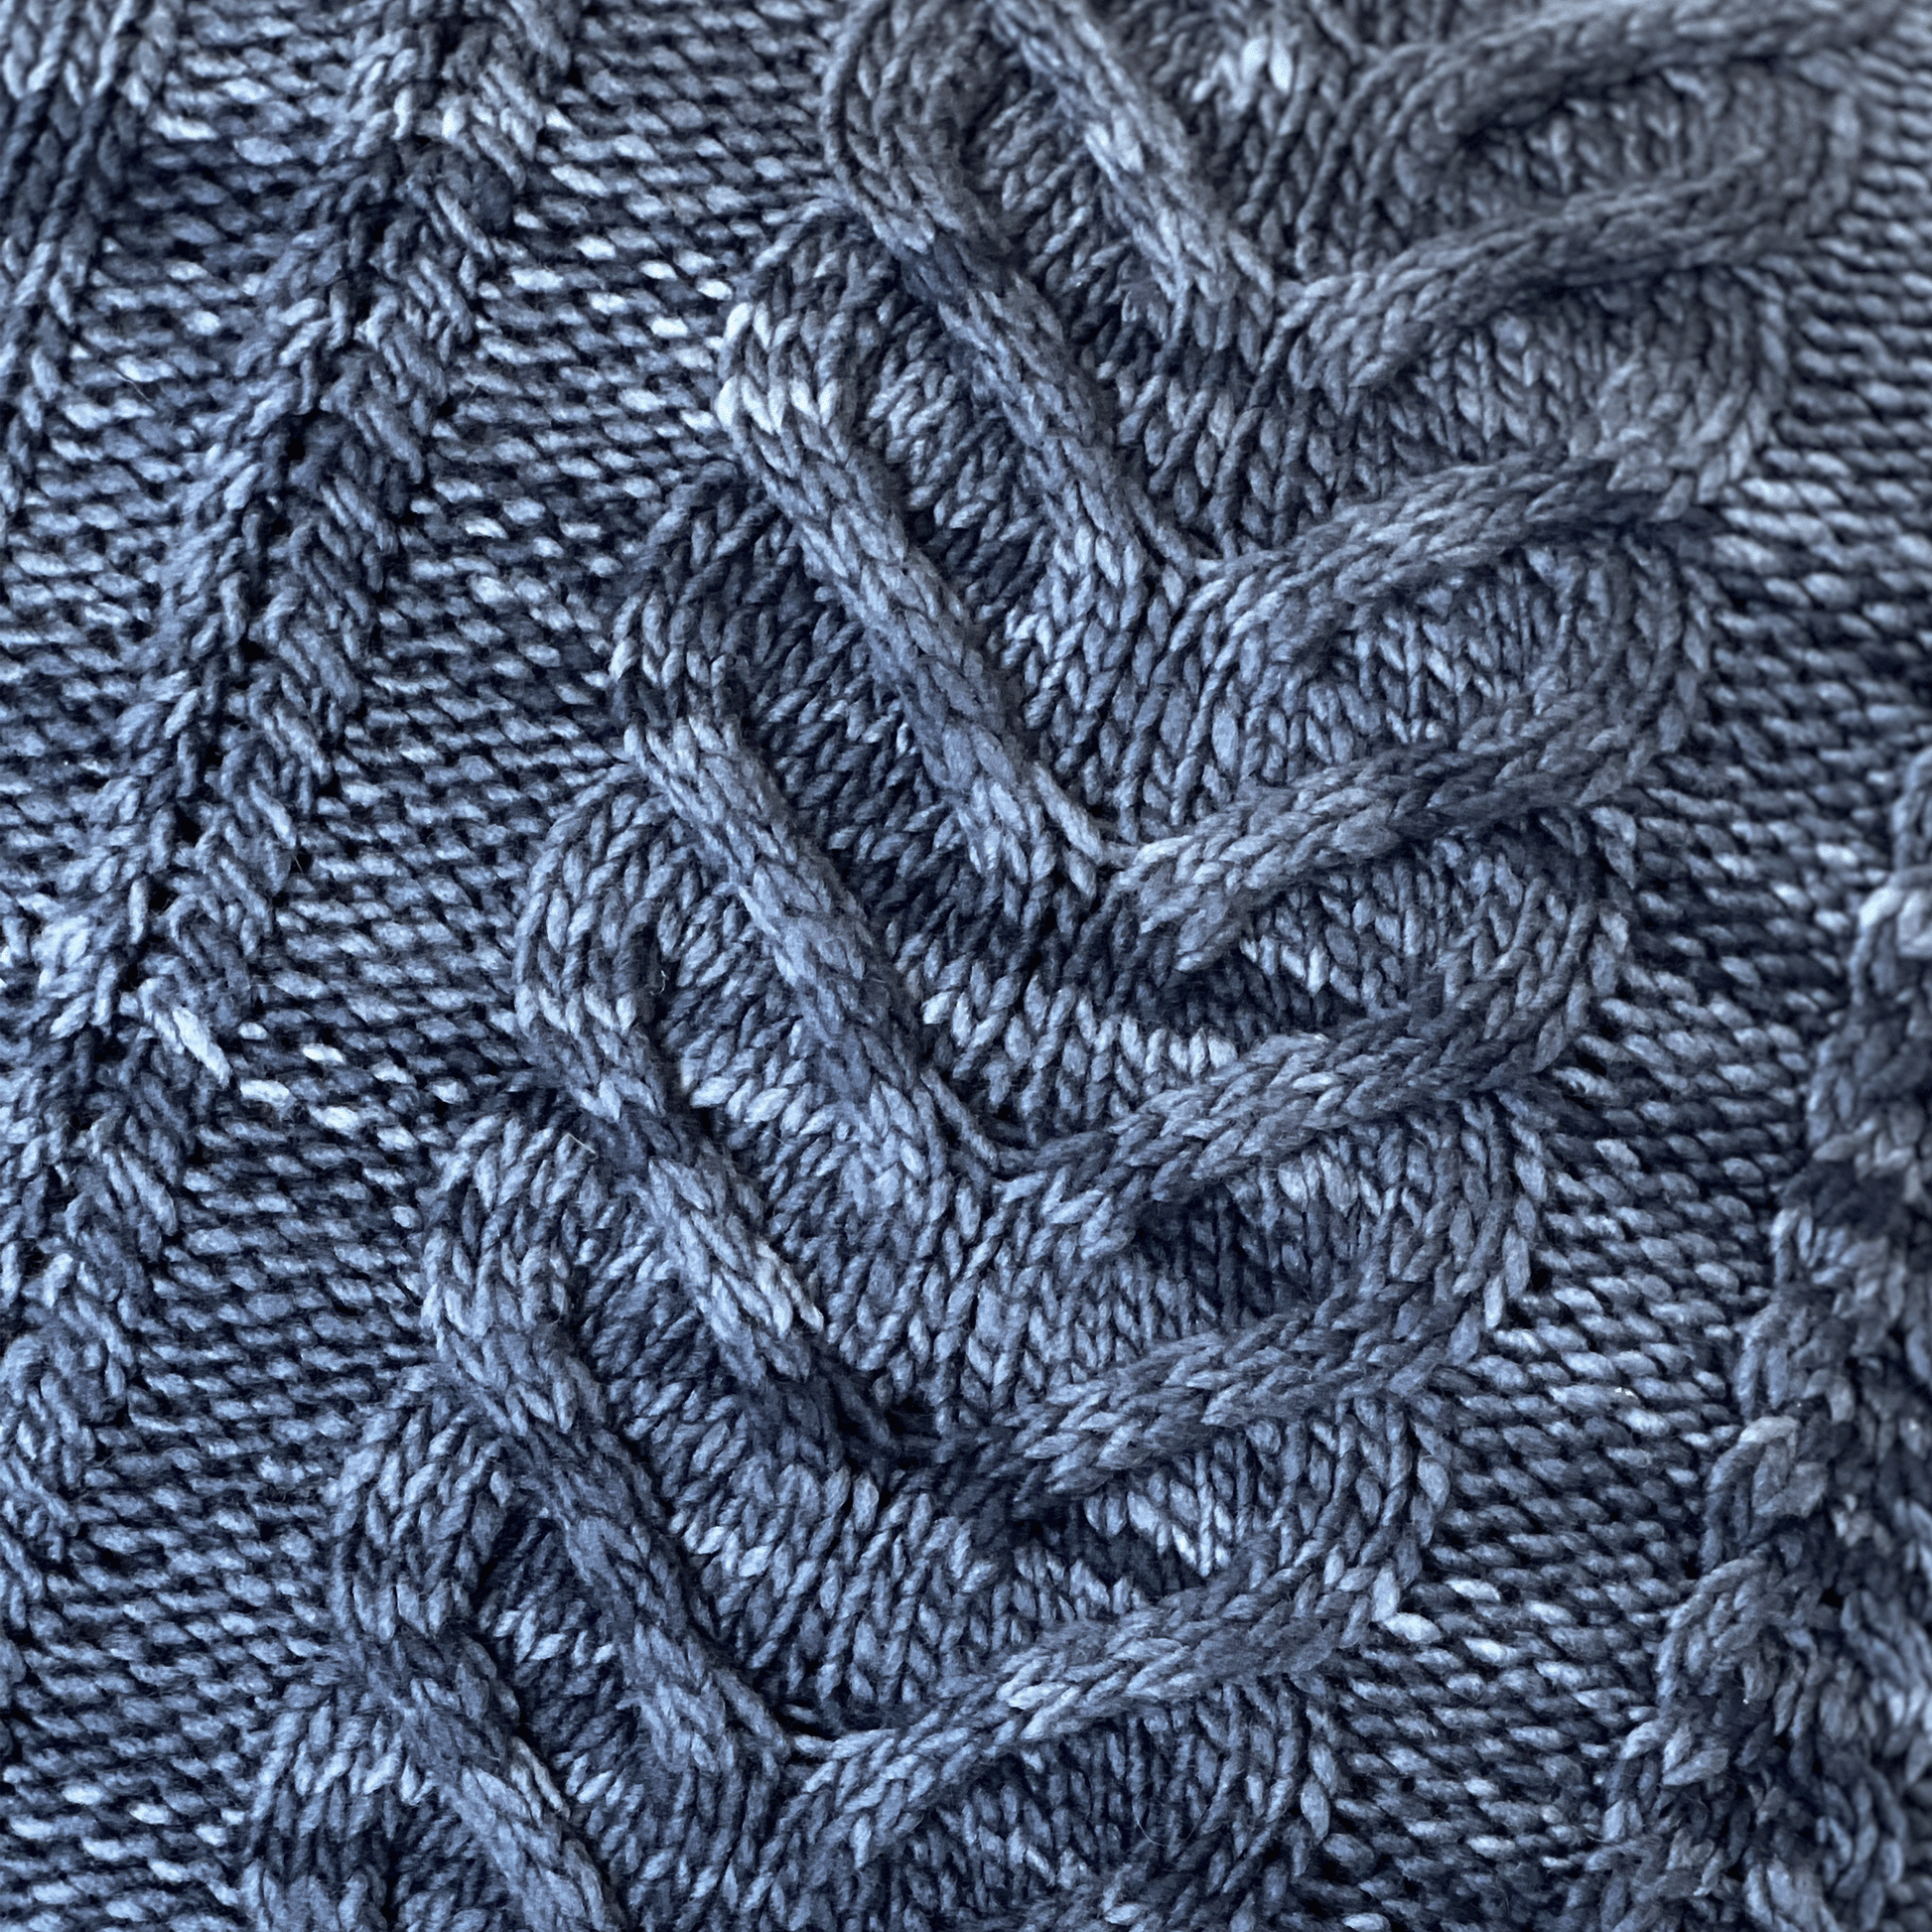 Manos del Uruquay's yarns are hand-dyed by artisans in the Uruguayan countryside. The tonal variations in this denim / steel blue merino wool adds depth to the solid colorway.